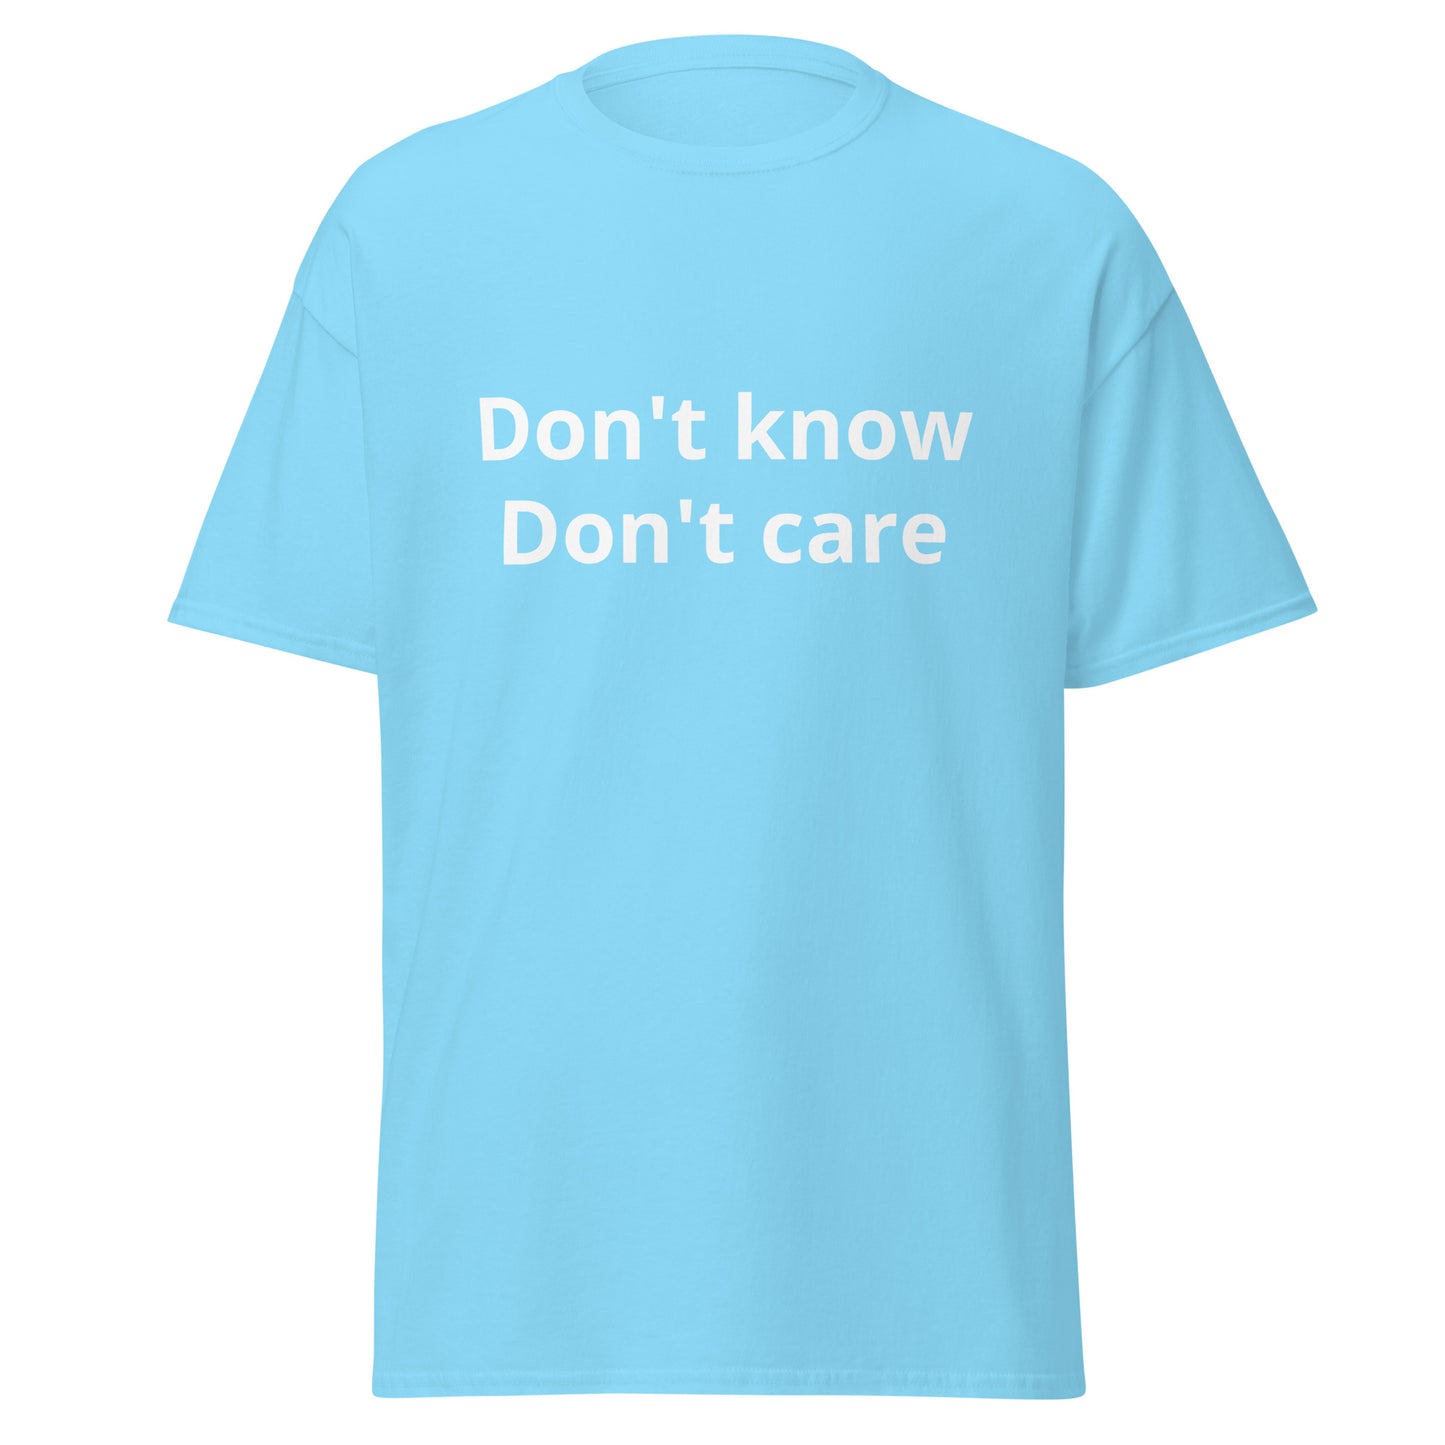 Don’t know don’t care funny shirt for men